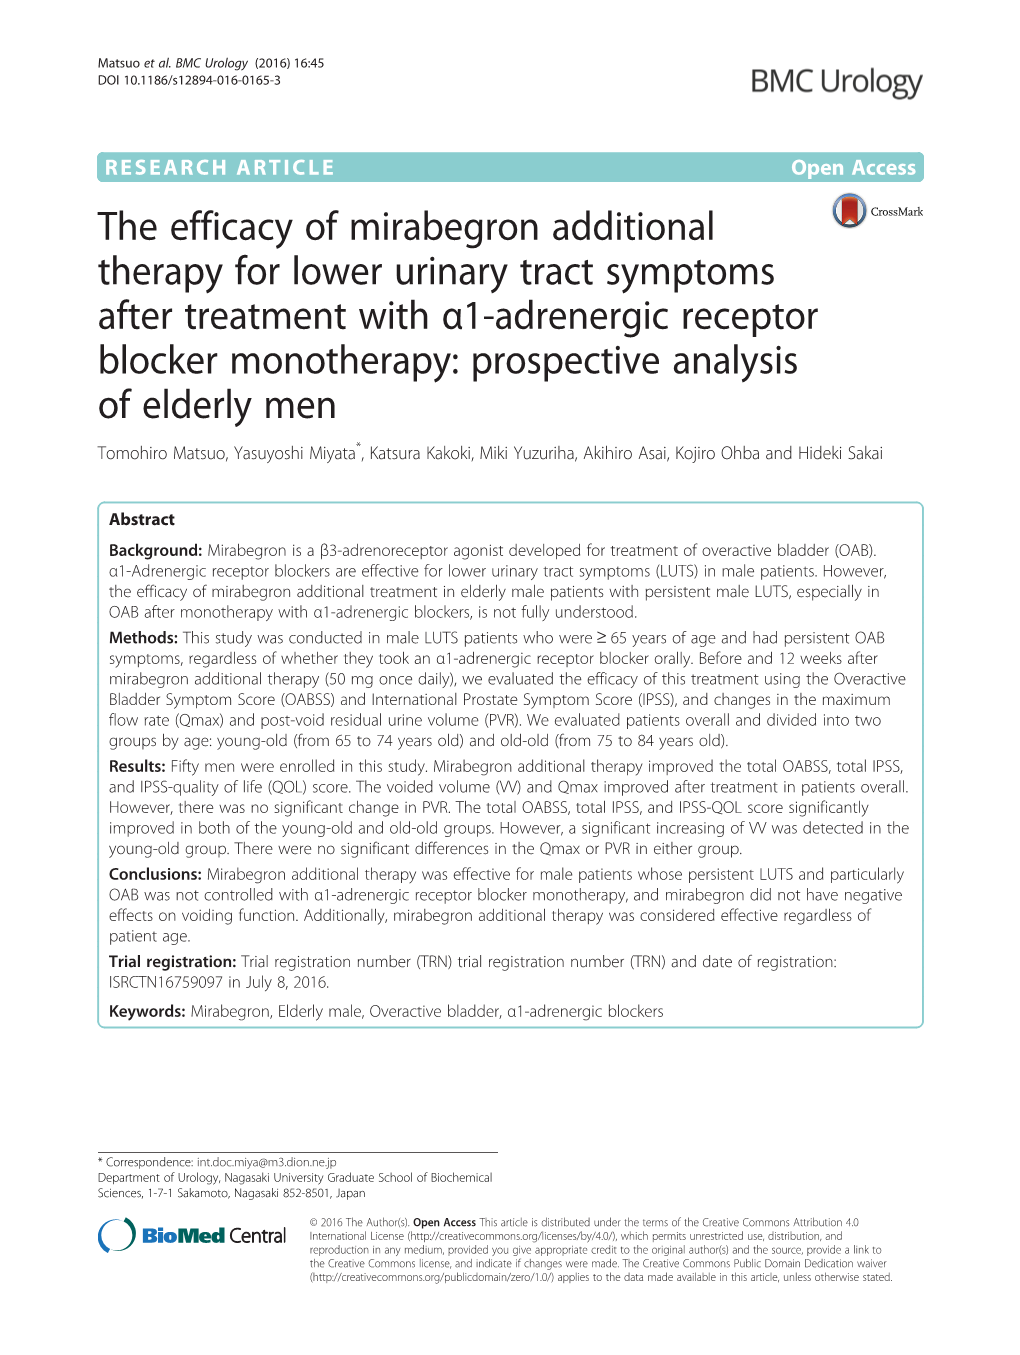 The Efficacy of Mirabegron Additional Therapy for Lower Urinary Tract